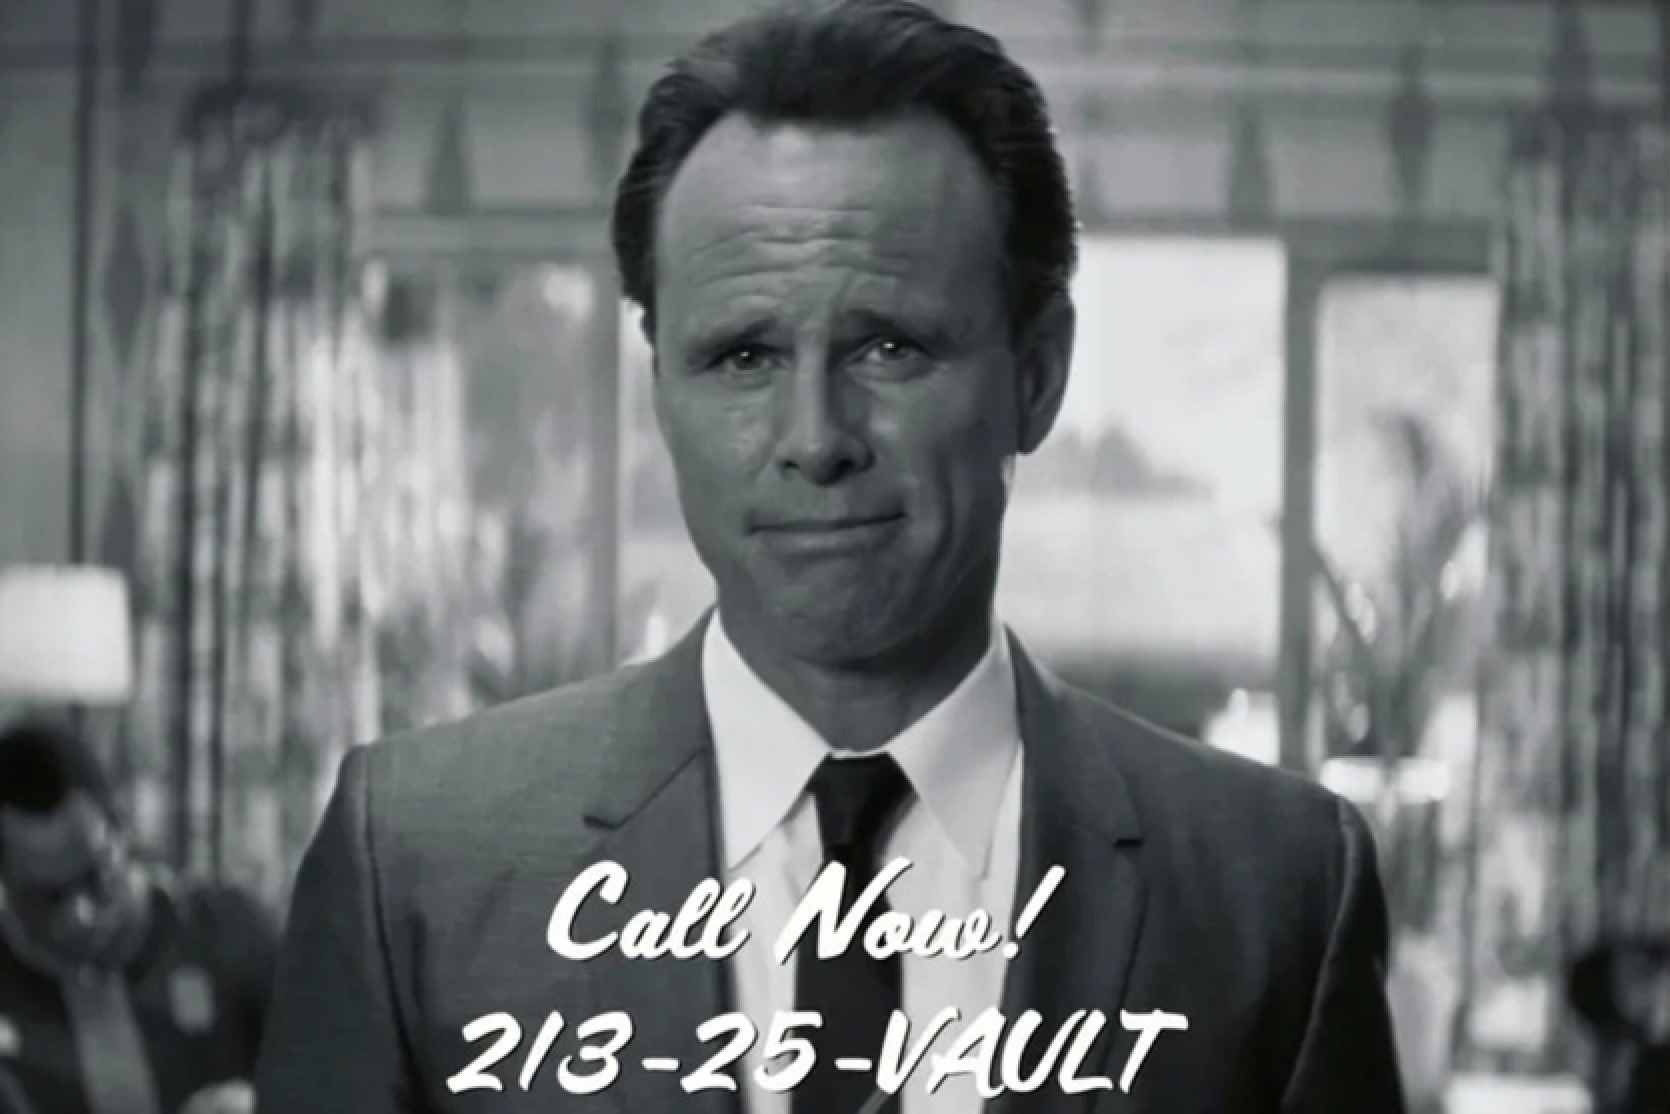 Fallout series: what happens if you call the number on the screen